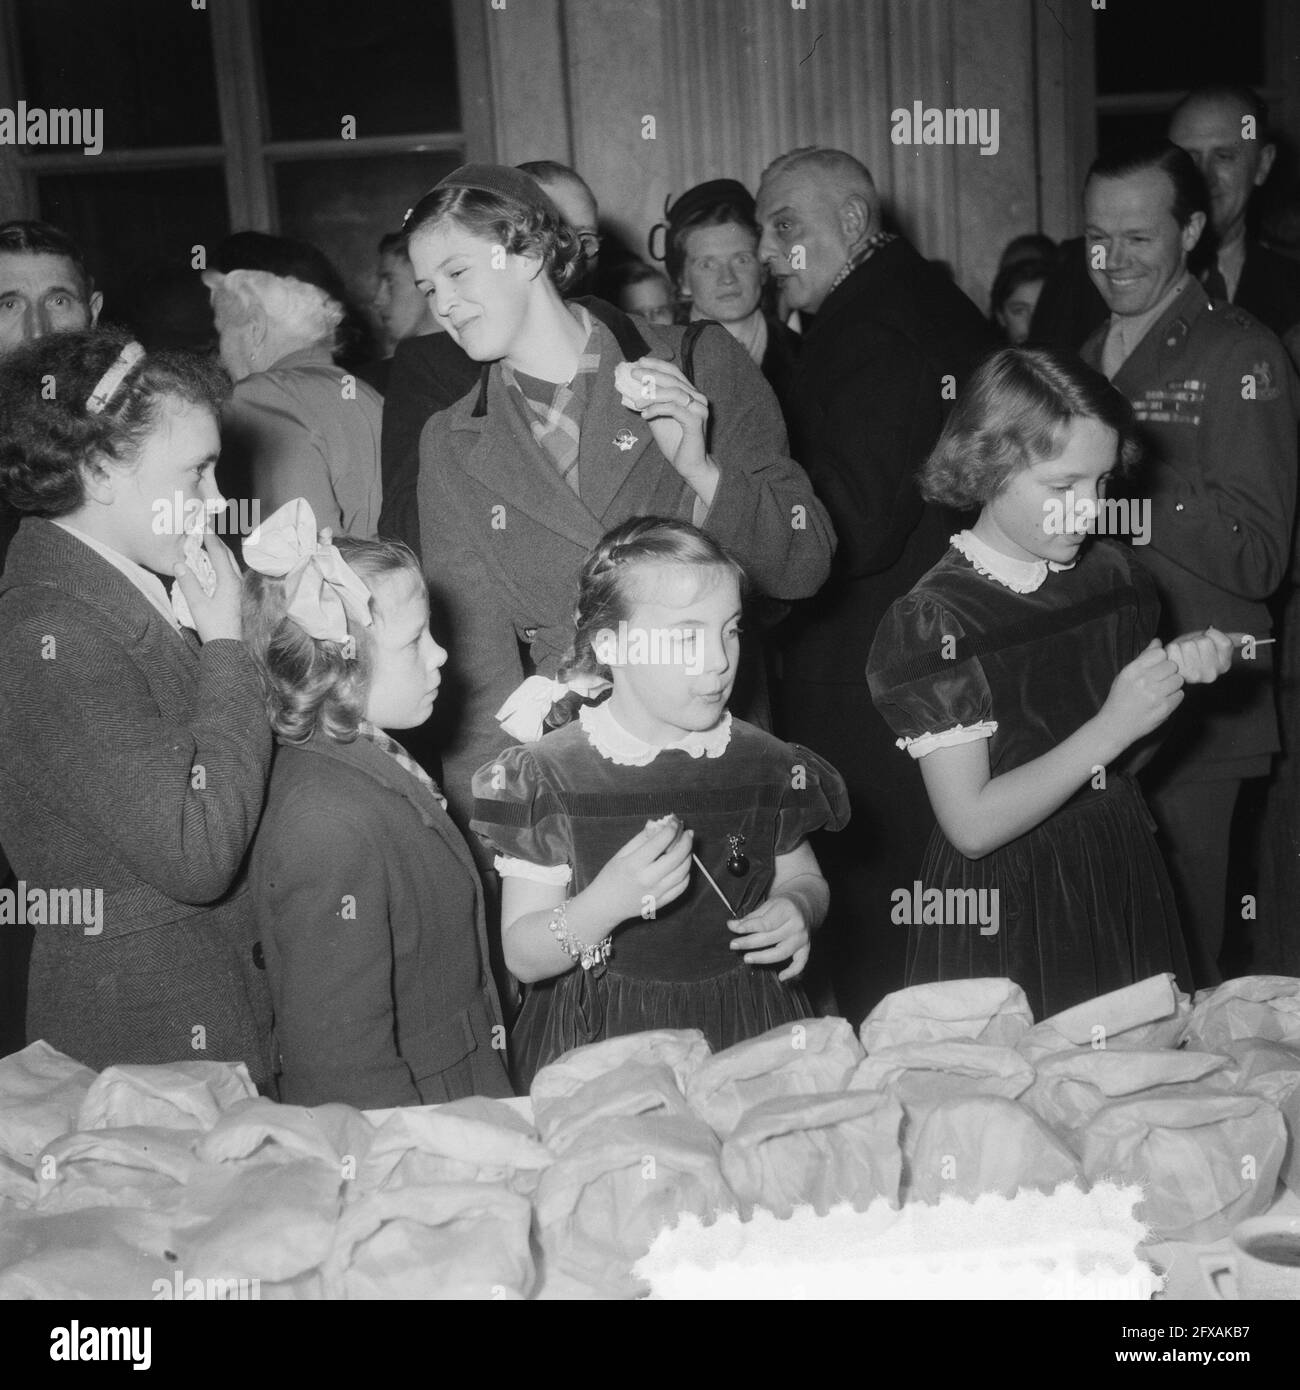 Christmas party Royal Palace Amsterdam, December 22, 1951, CHRISTFEST, Royal Palaces, The Netherlands, 20th century press agency photo, news to remember, documentary, historic photography 1945-1990, visual stories, human history of the Twentieth Century, capturing moments in time Stock Photo